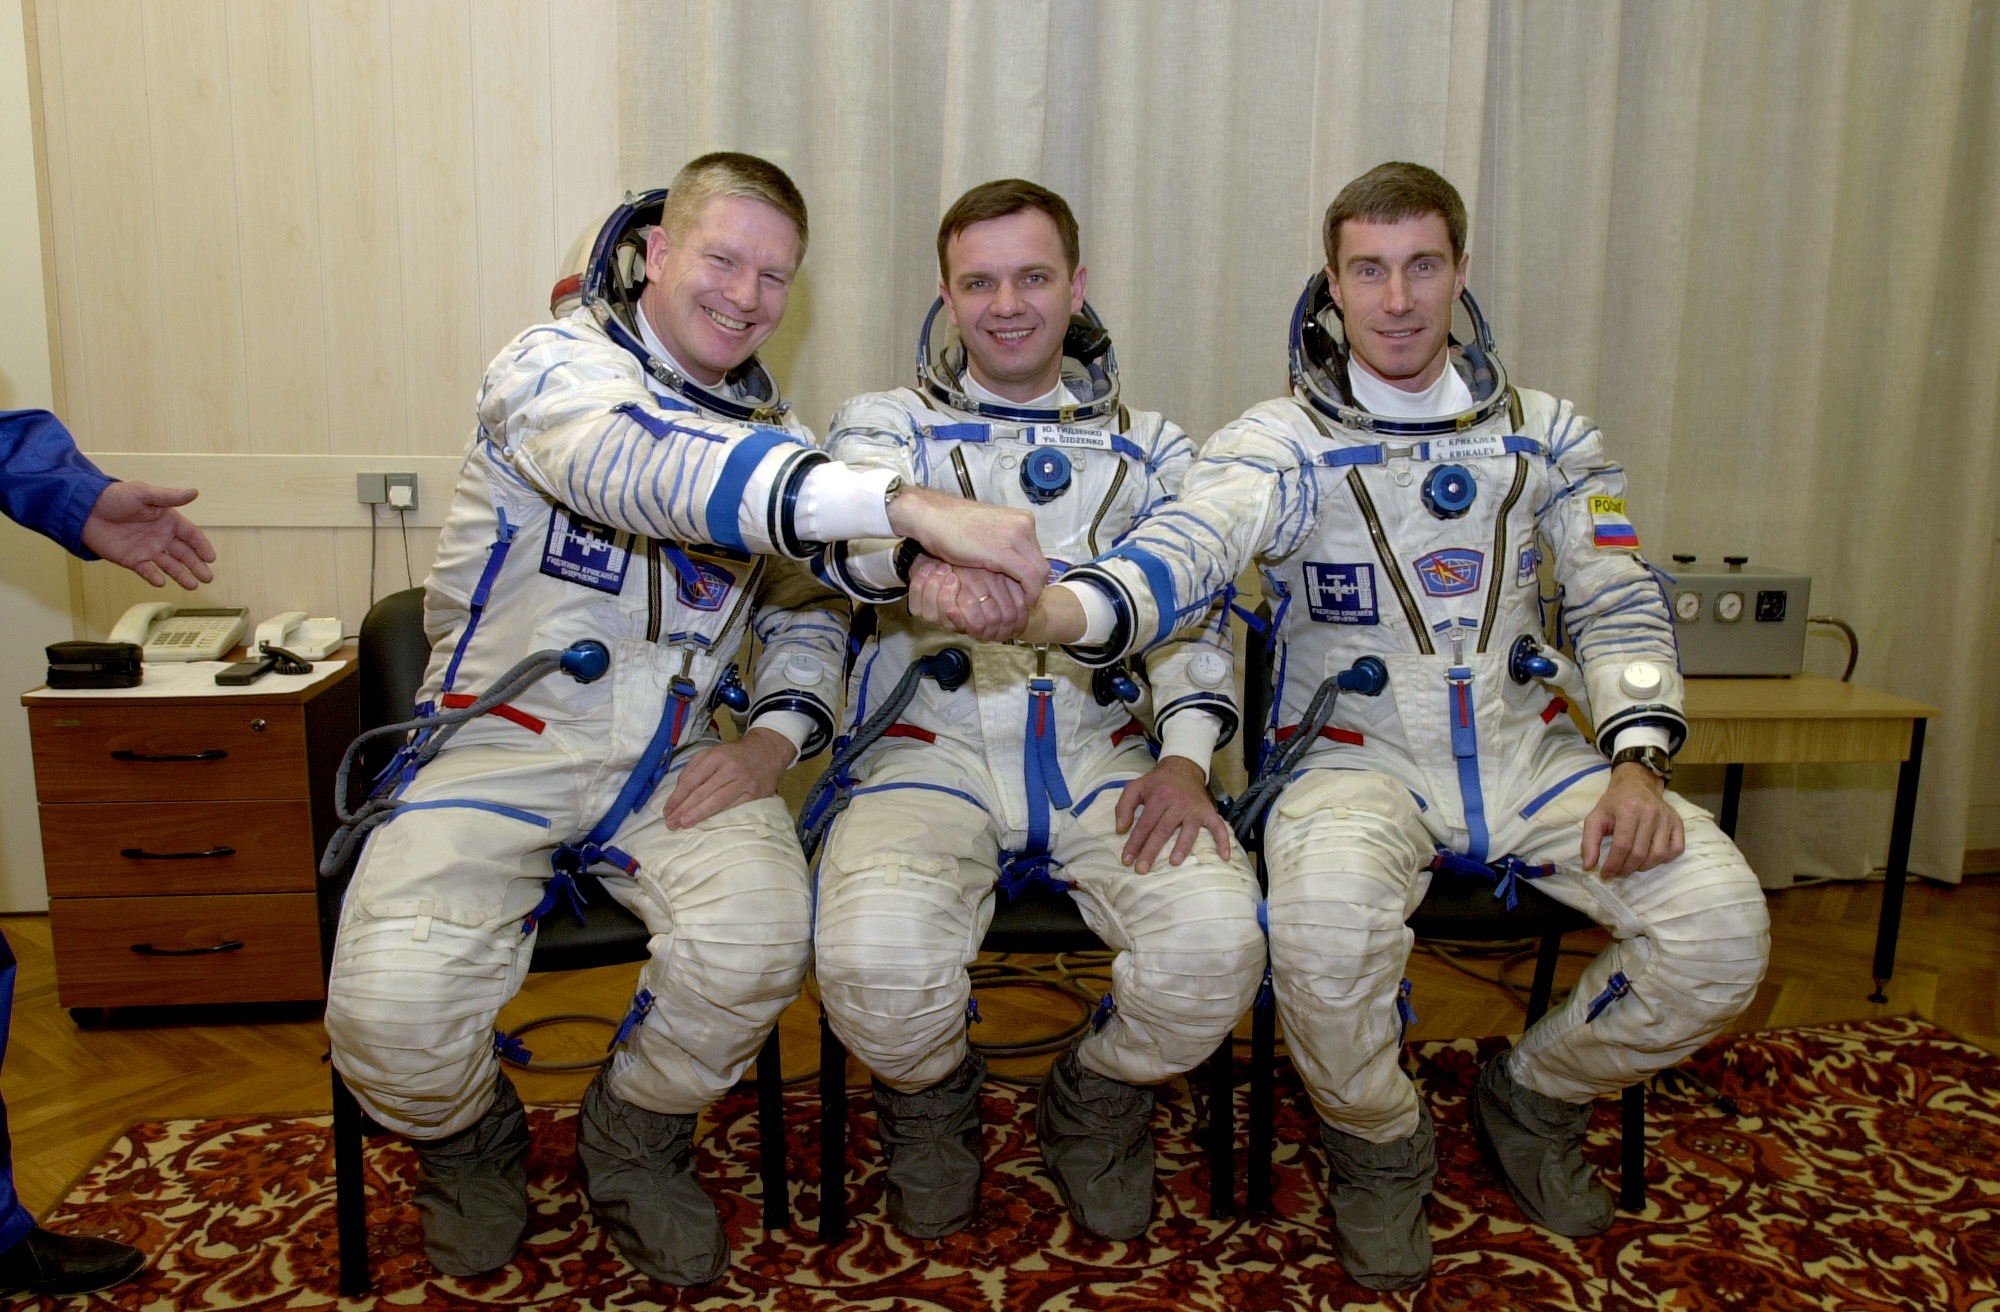 Clad in their Sokol ("Falcon") launch and entry suits, Expedition 1 crew members (from left) Bill Shepherd, Yuri Gidzenko and Sergei Krikalev began the permanent occupancy of the International Space Station (ISS), 15 years ago, this week. Photo Credit: NASA